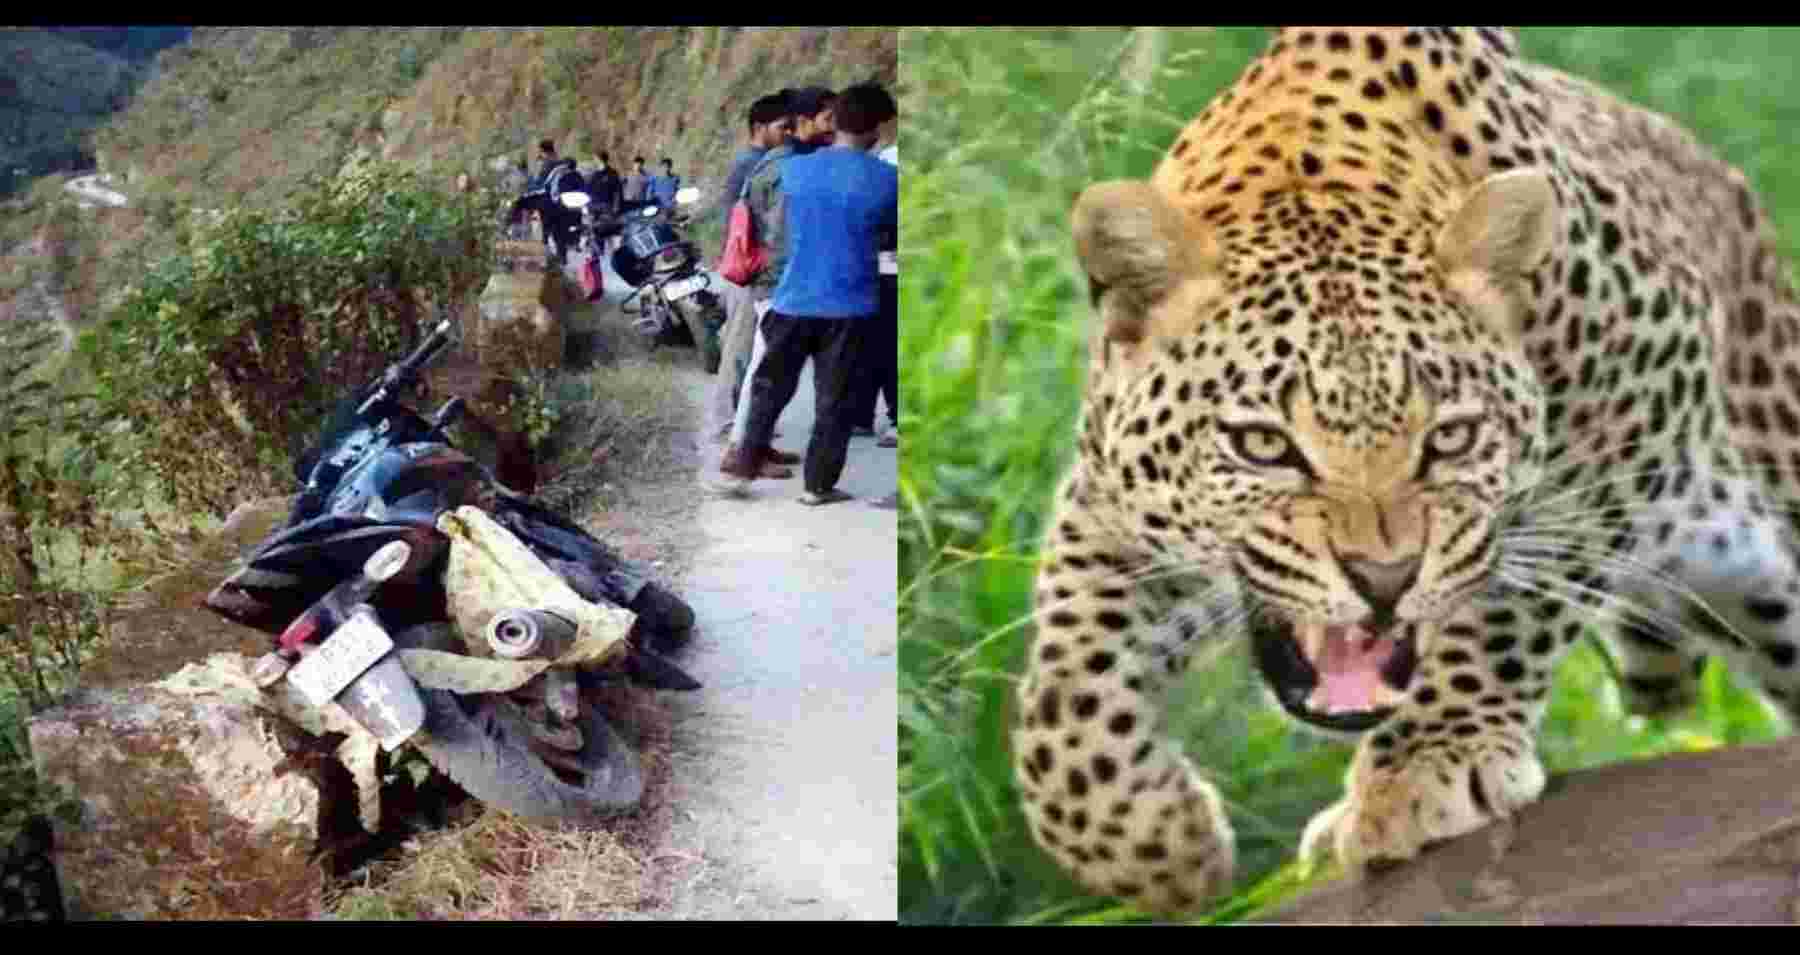 Uttarakhand news: Leopard attack swooped on bike riding youth, dragged away in CHAMPAWAT